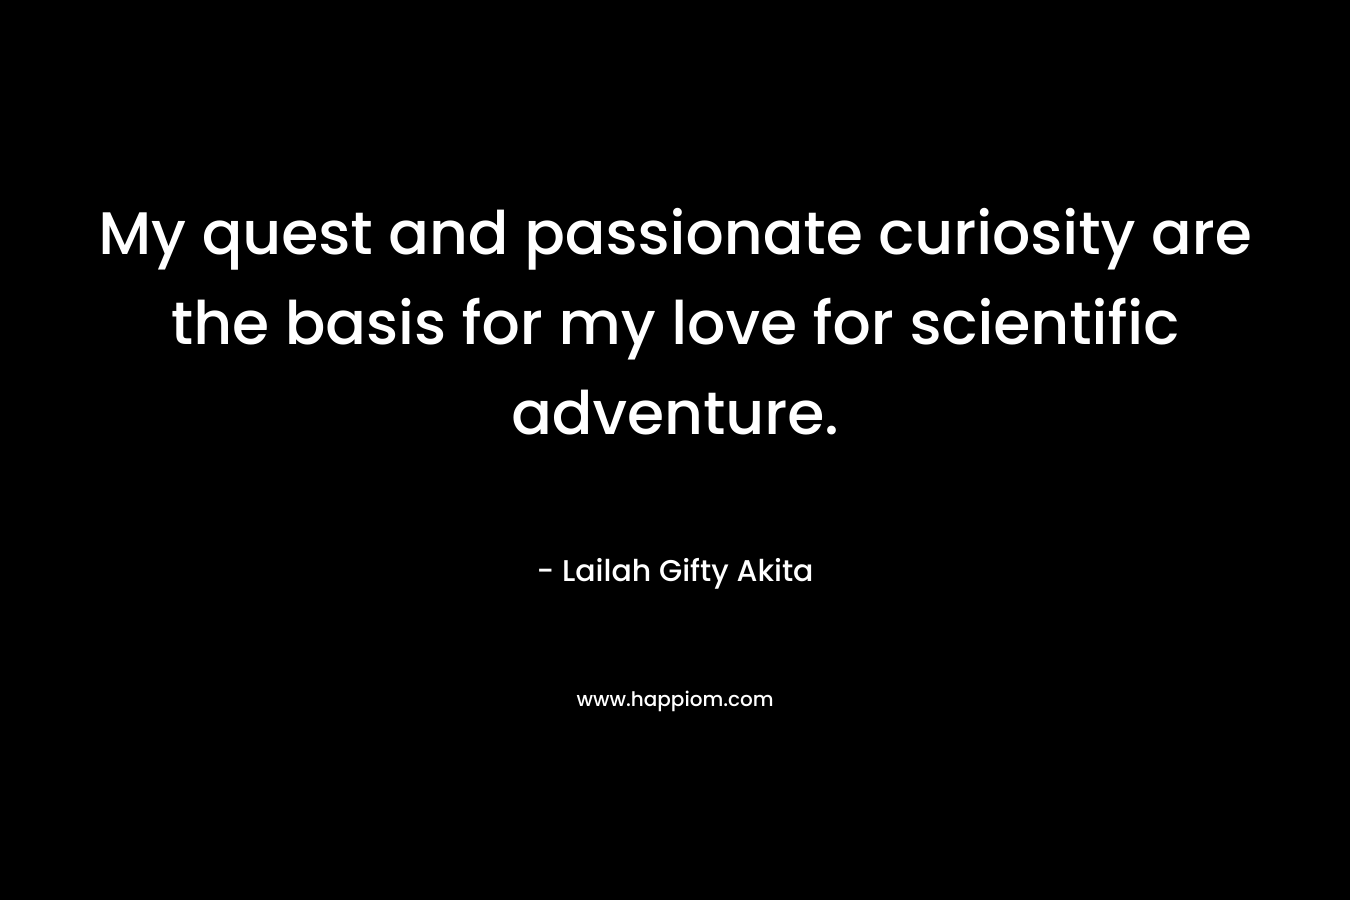 My quest and passionate curiosity are the basis for my love for scientific adventure.